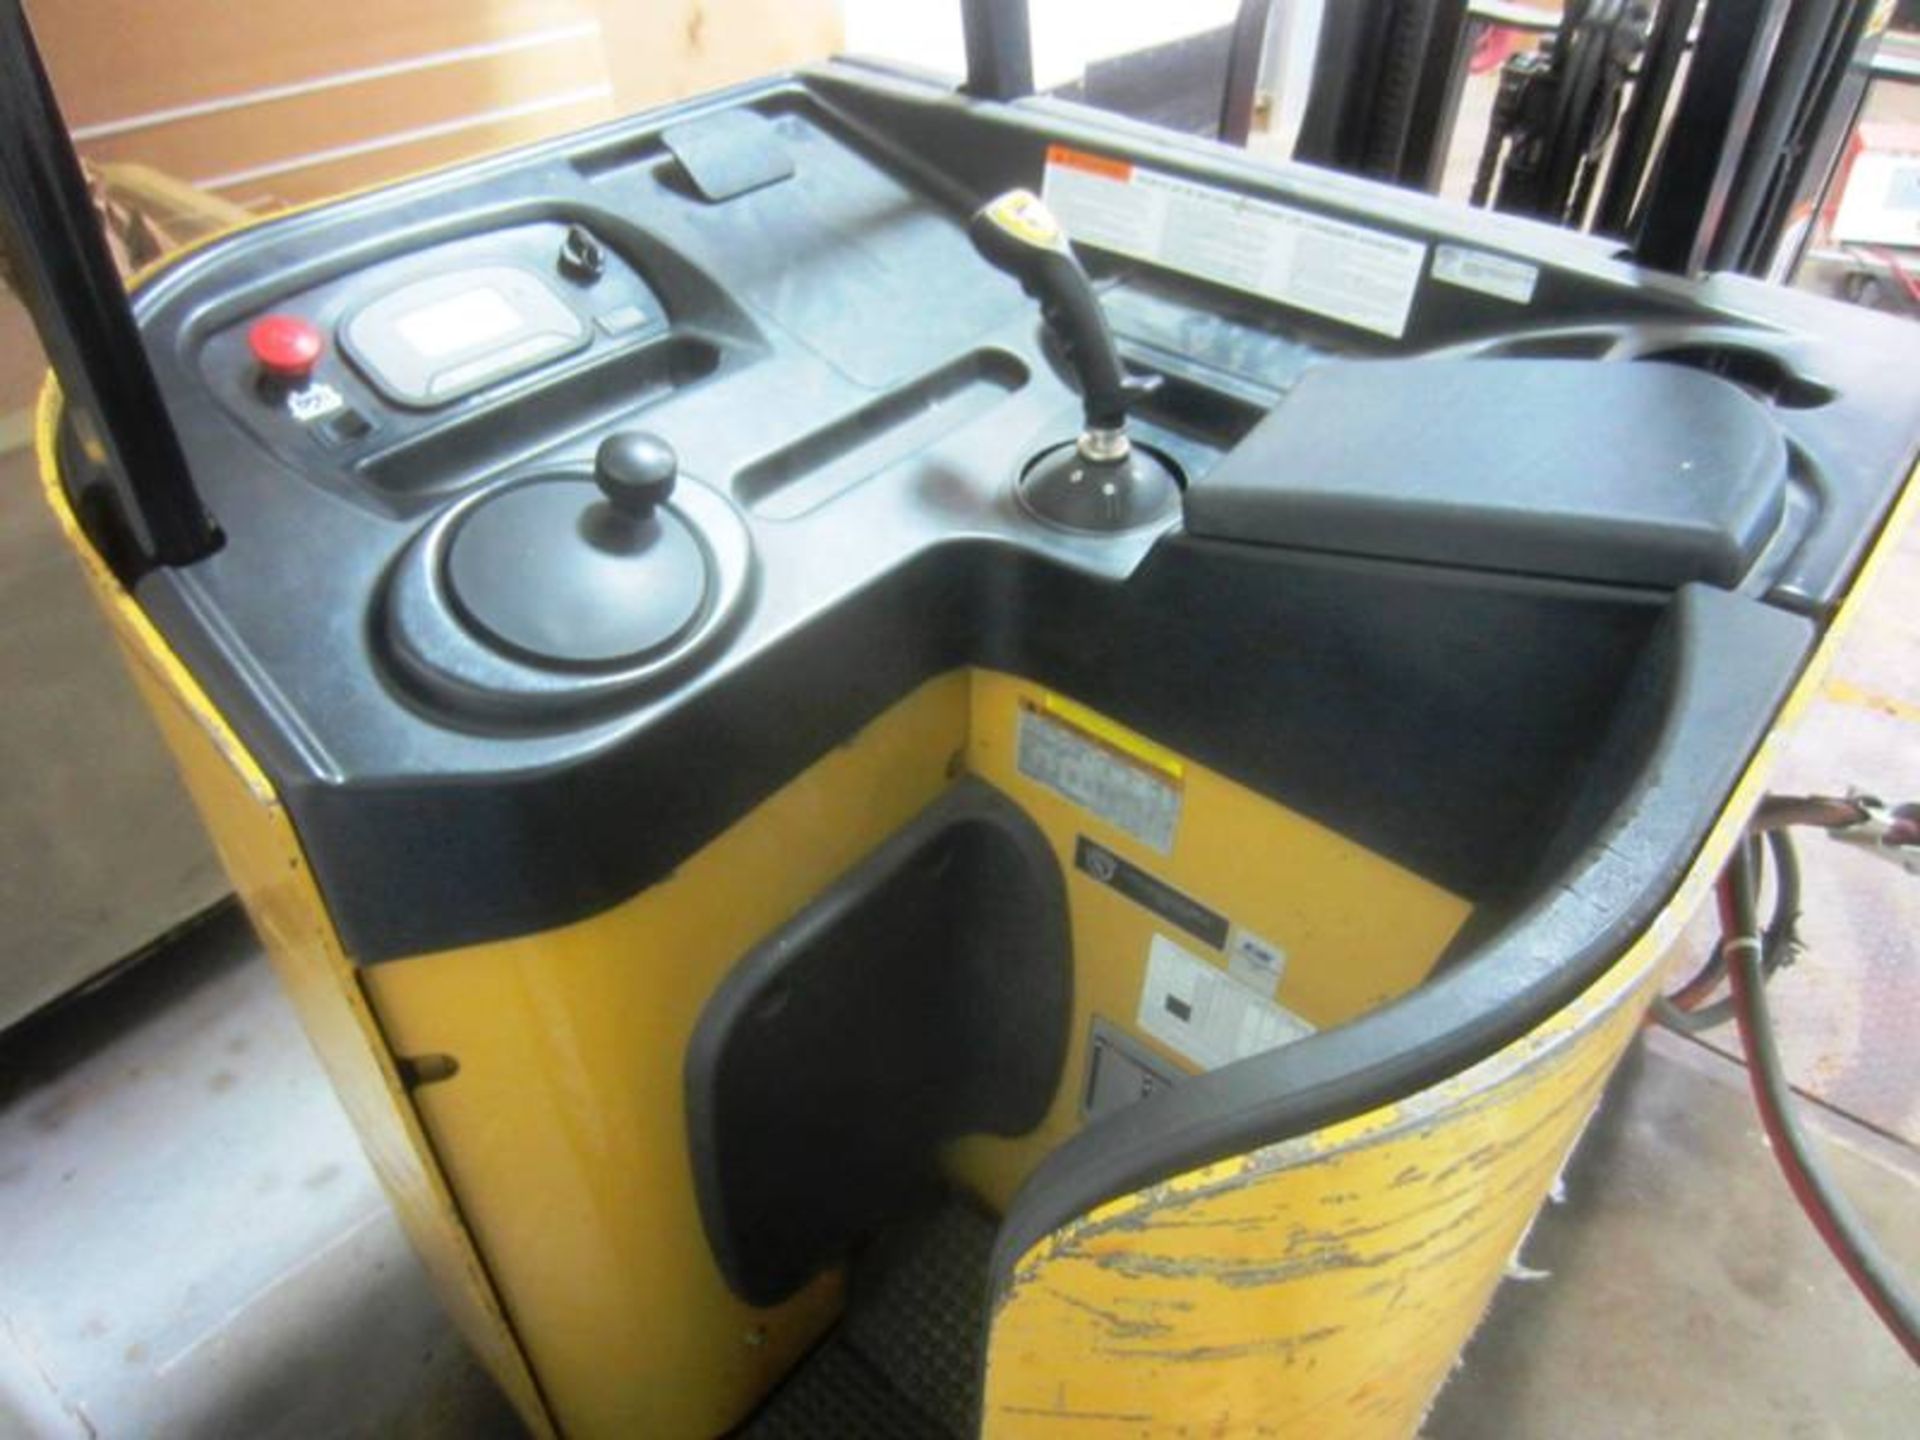 Caterpillar Mdl. ES3500 Stand-Up Forklift, Ser. #A2ES120344, 3250 Lbs. cap. w/Power Guard HD - Image 2 of 3